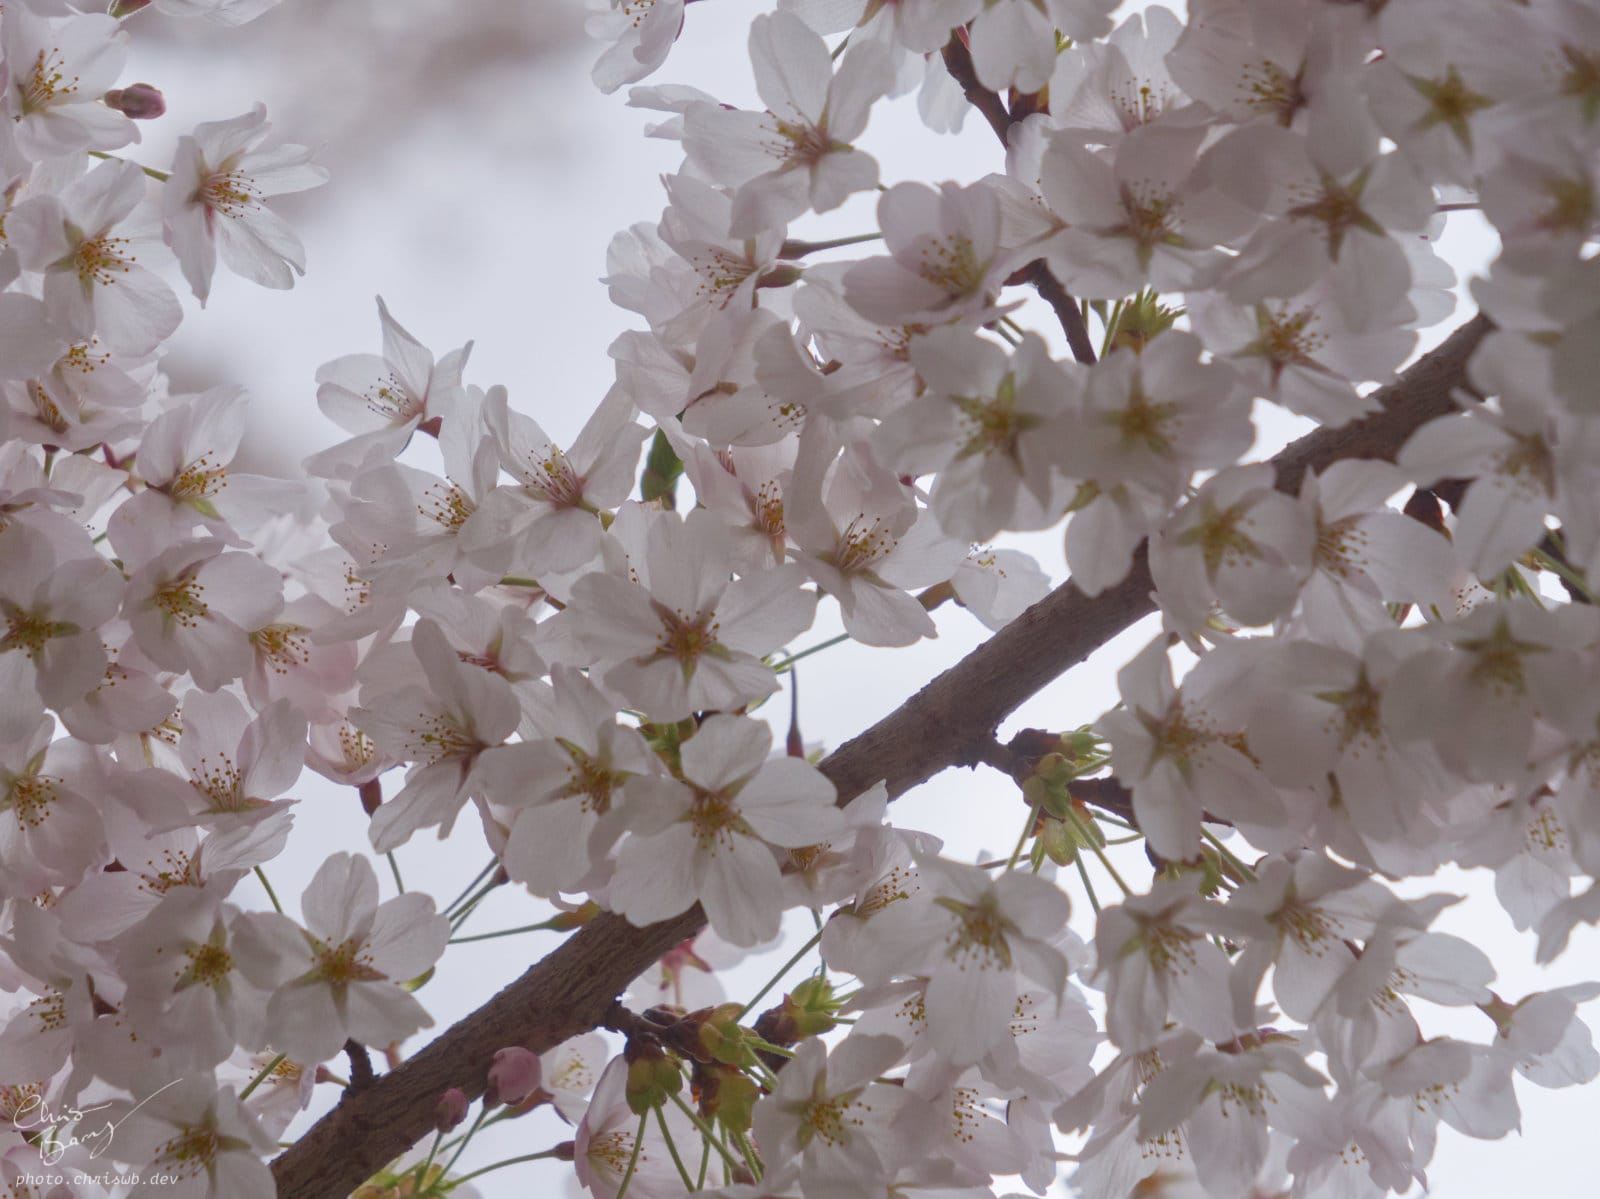 Close up of several clusers of white flowers on a branch. There are some hints of pink